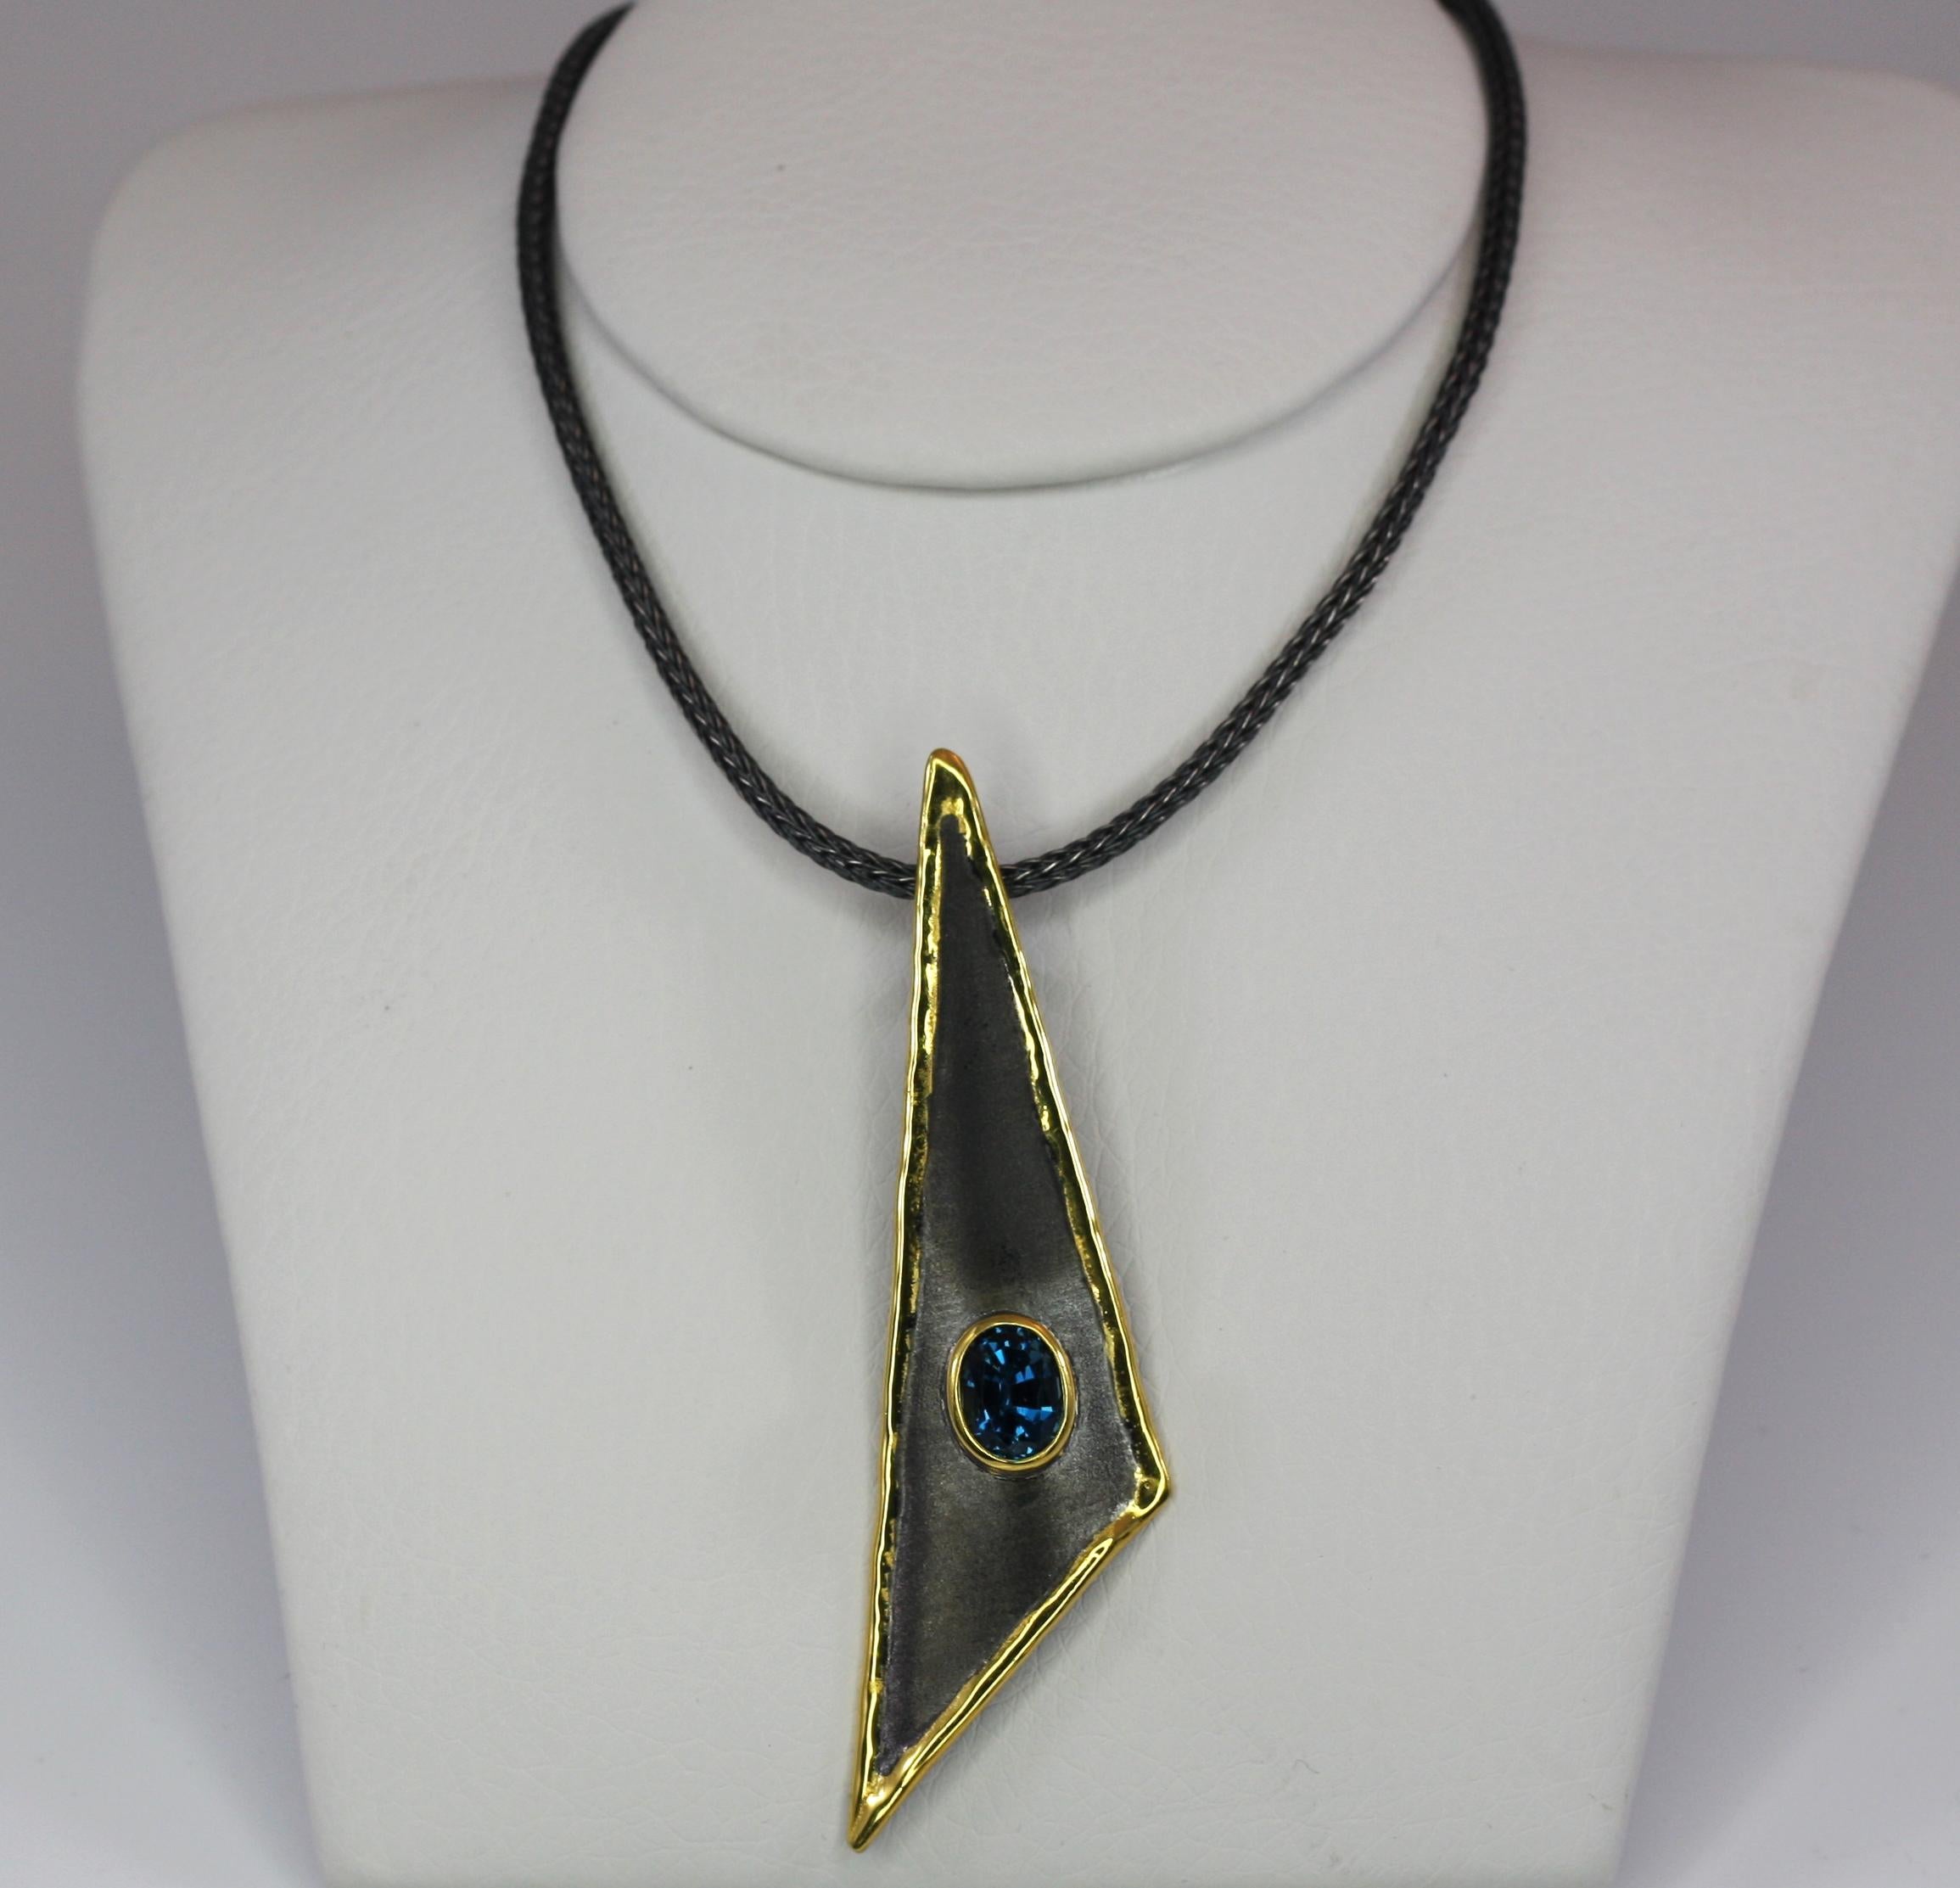 Presenting Yianni Creations Fine Silver pendant necklace all handcrafted in Greece from a silver 950 purity and plated with Black Rhodium and pure gold on the edges. The pendant decorates a 1.60 Carat oval cut London Blue Topaz. The unique look is